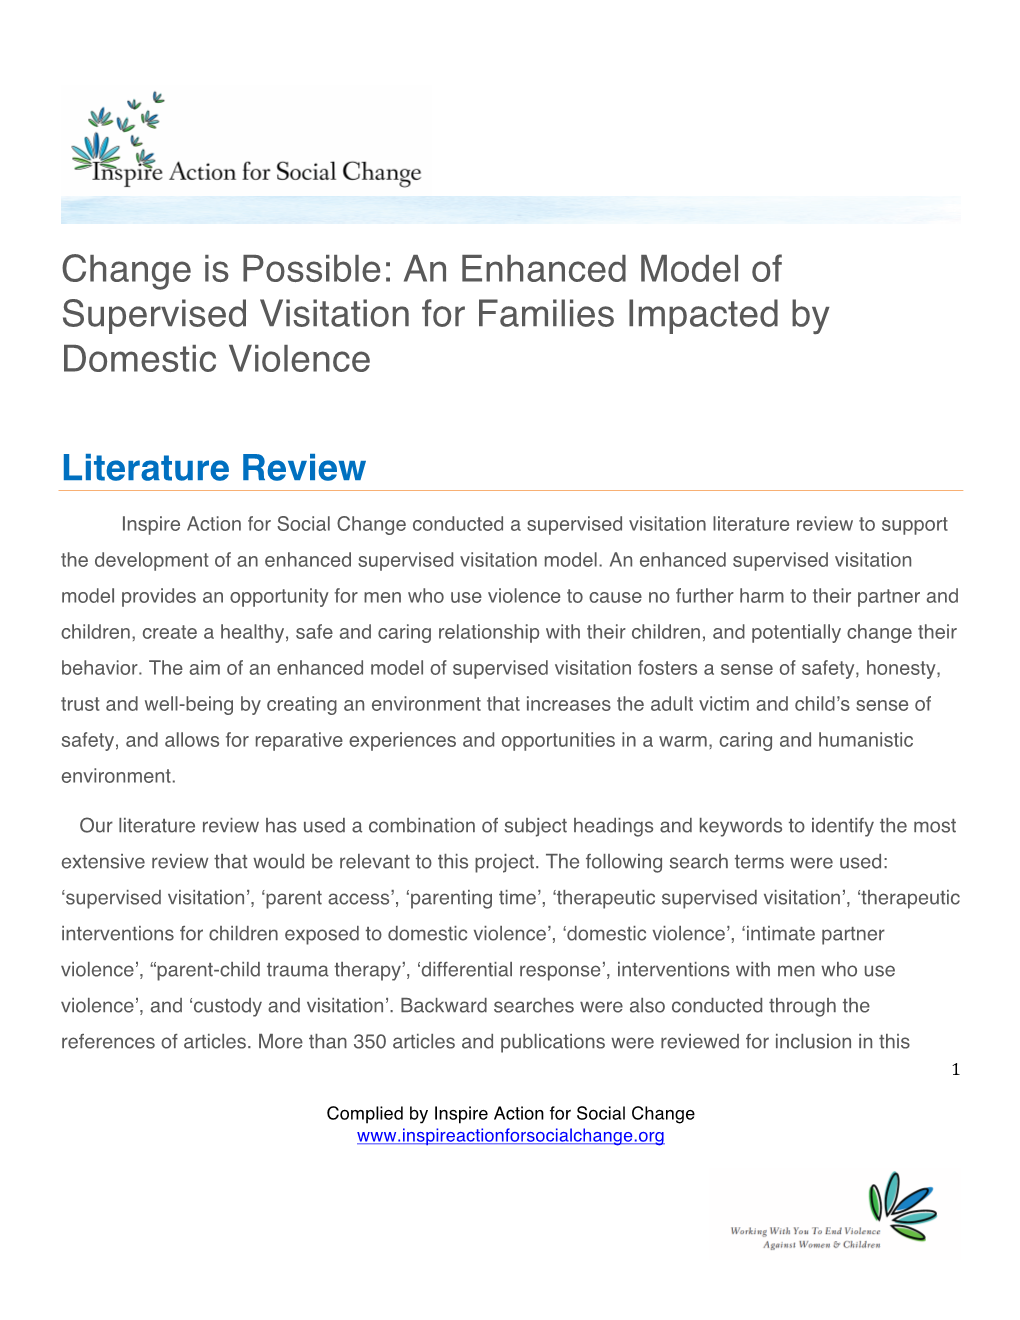 An Enhanced Model of Supervised Visitation for Families Impacted by Domestic Violence